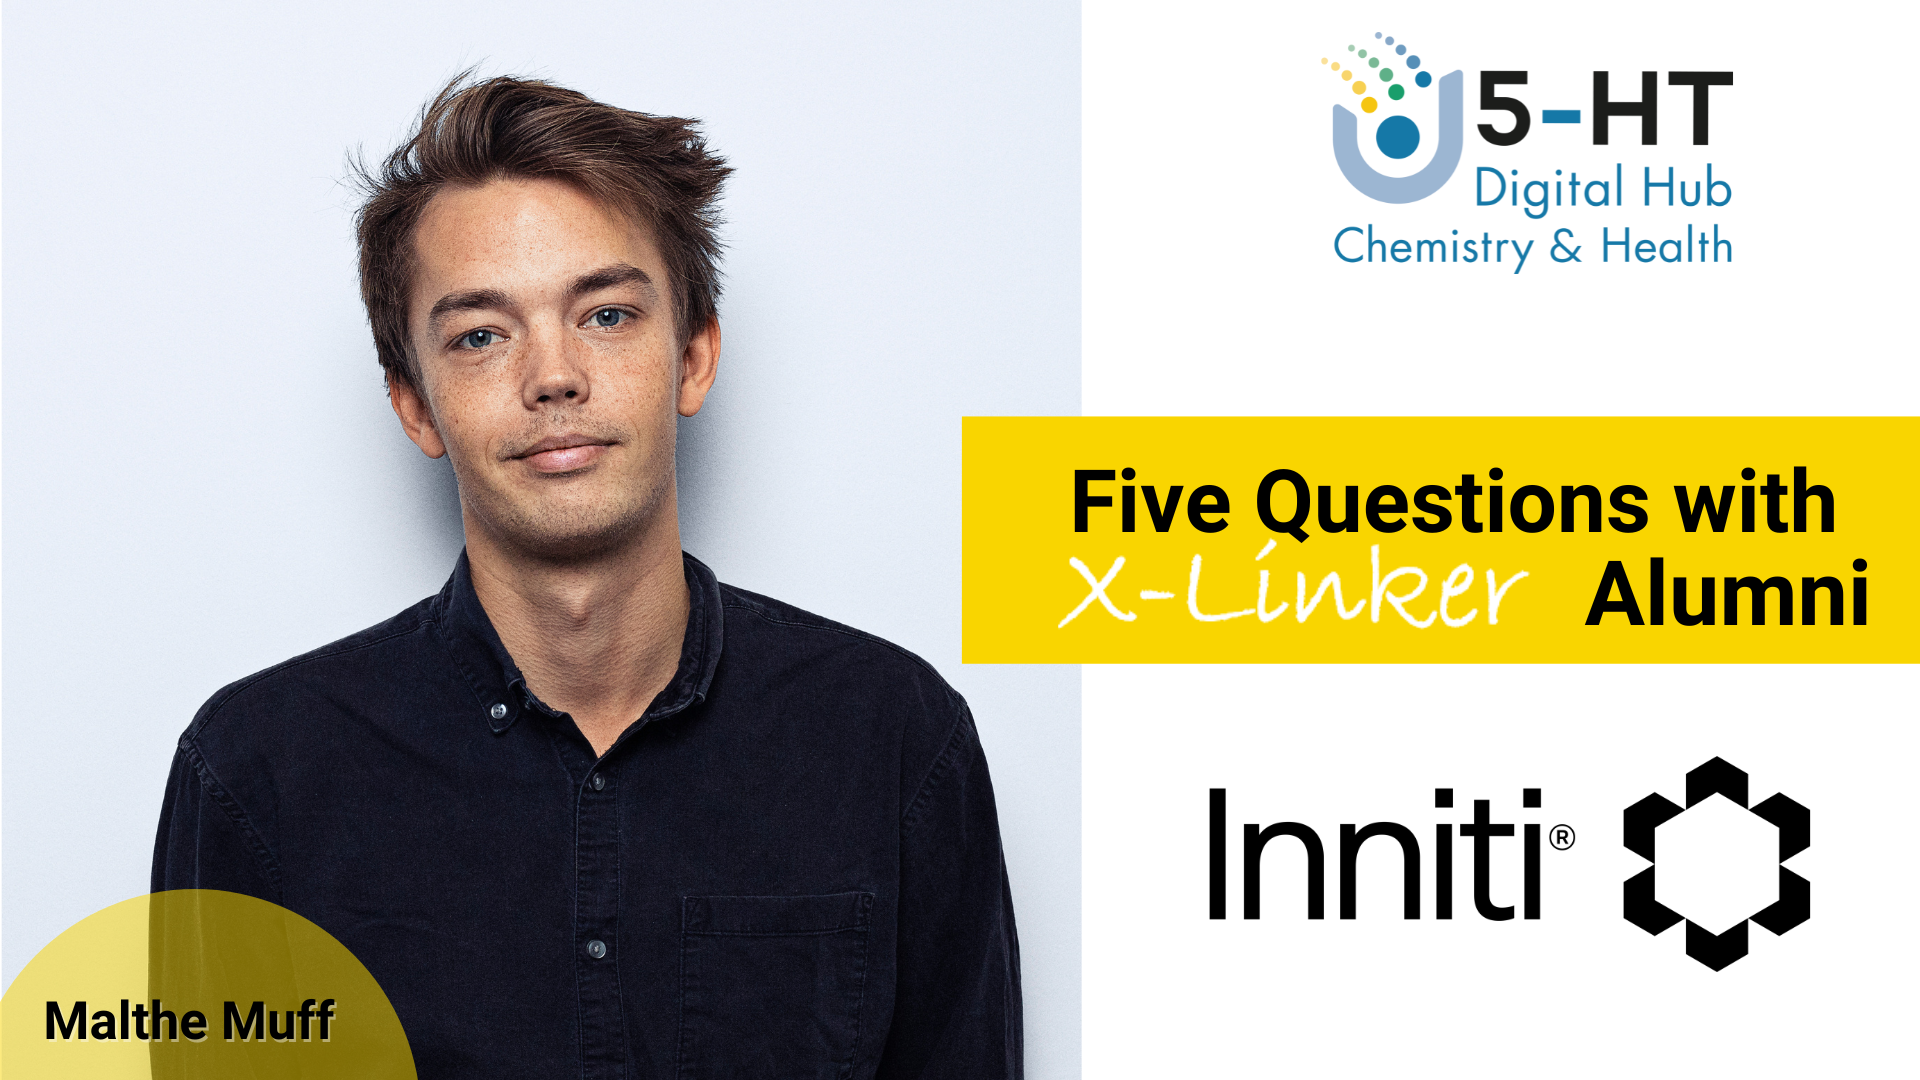 Five questions with X-linker Alumni Malthe Muff from Inniti